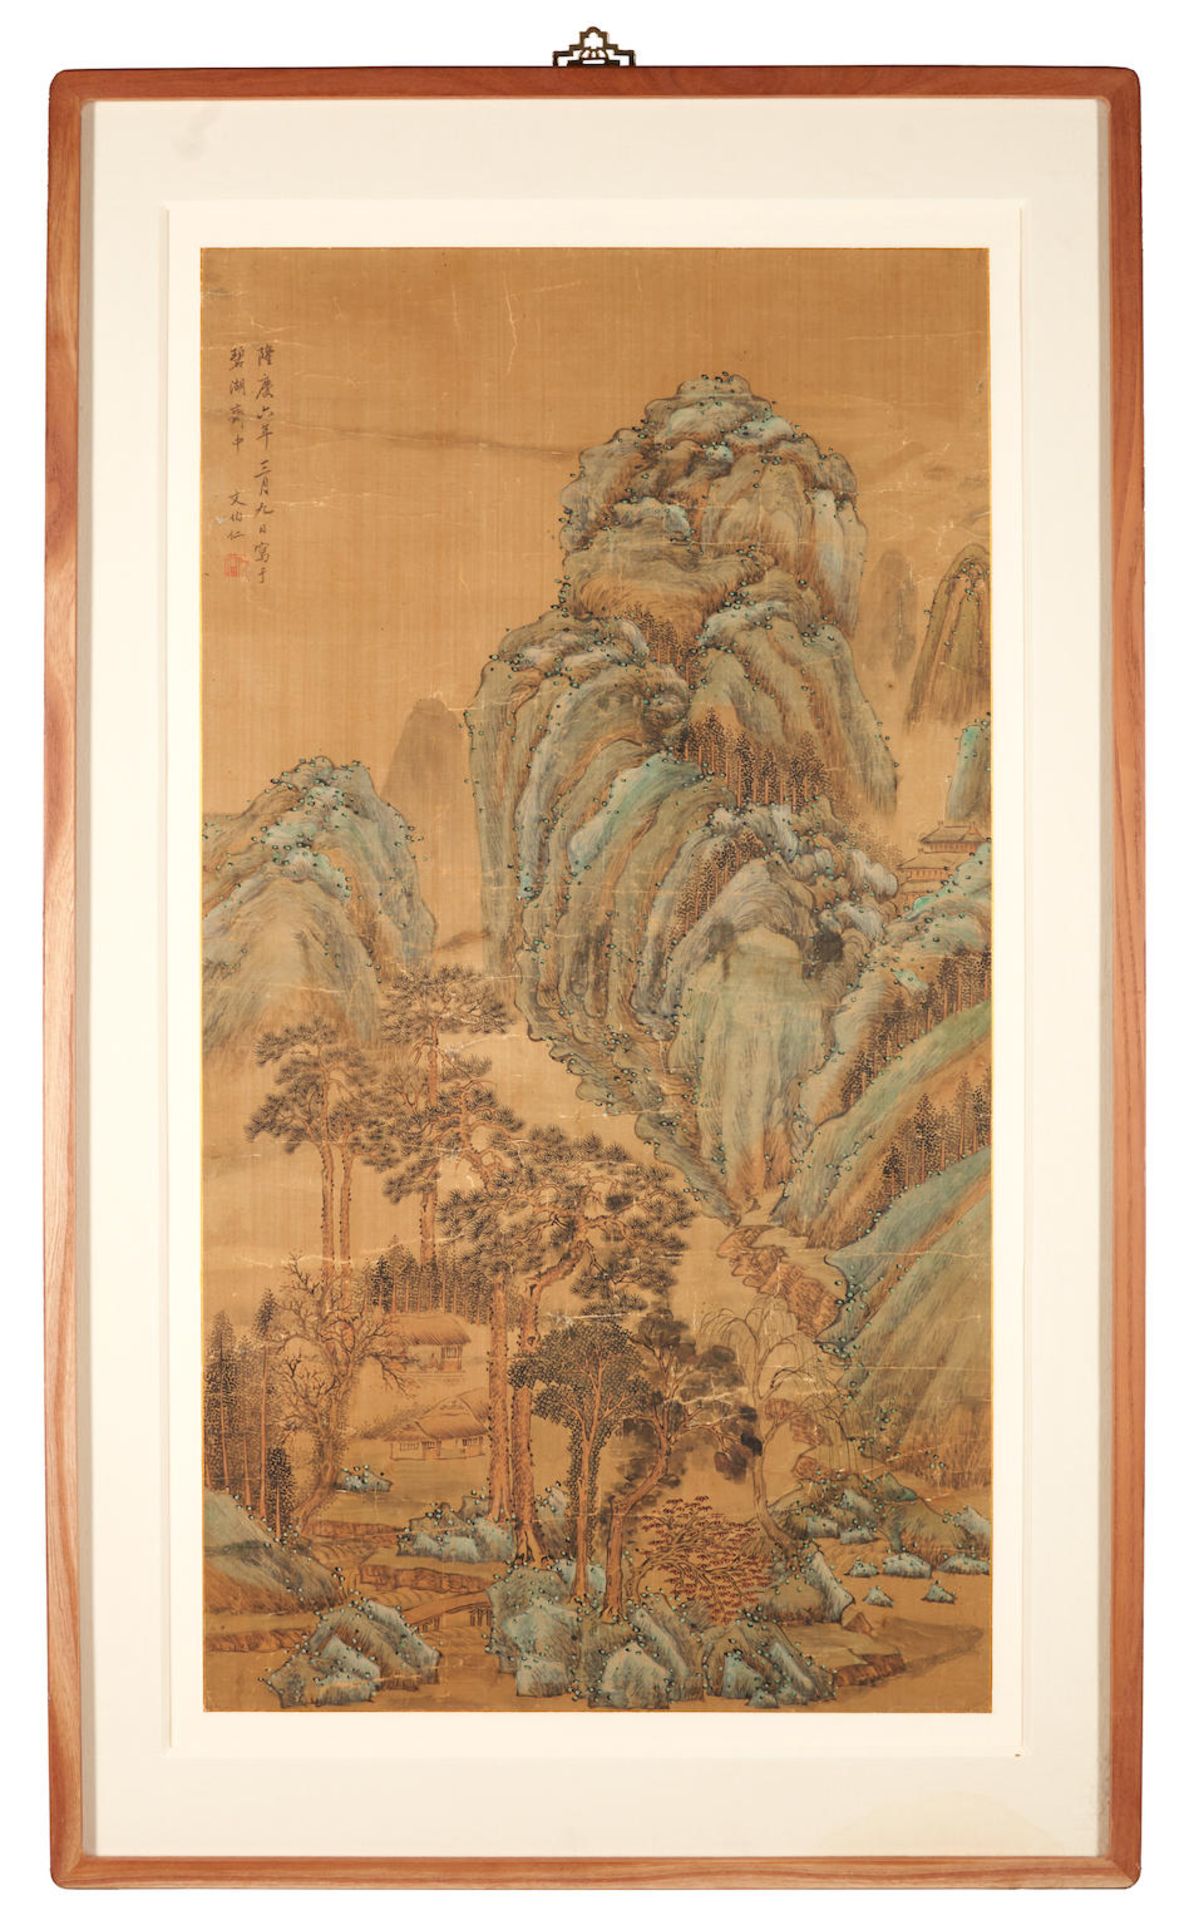 AFTER WEN BOREN (1502-1575) MOUNTAIN-AND-WATER LANDSCAPE - Image 3 of 3